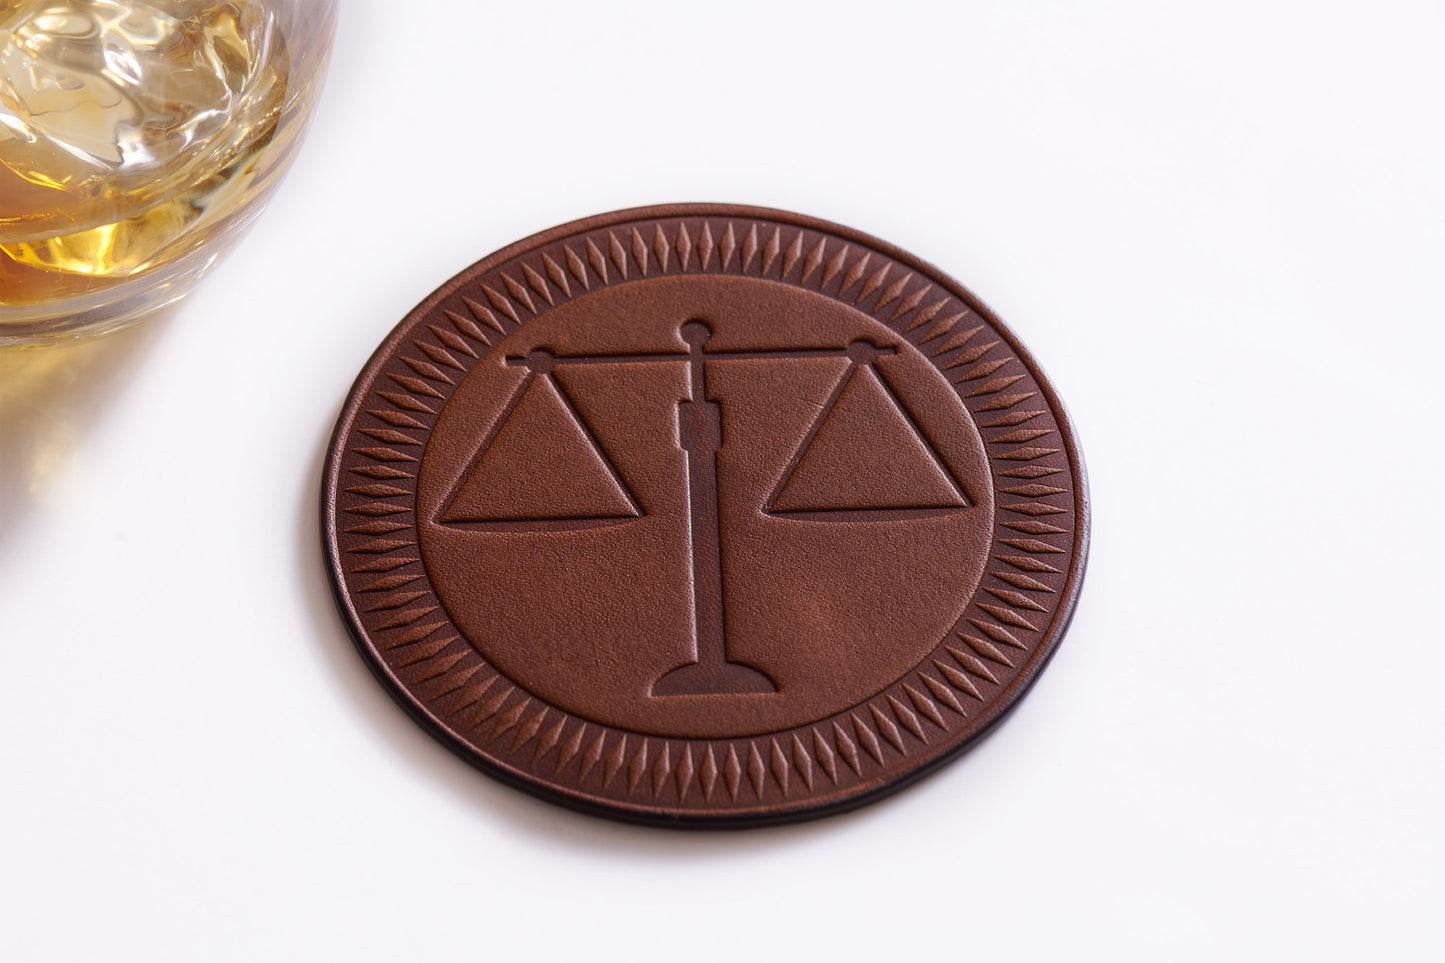 full grain leather coasters wit scales of justice design for law office accessory or lawyer gift